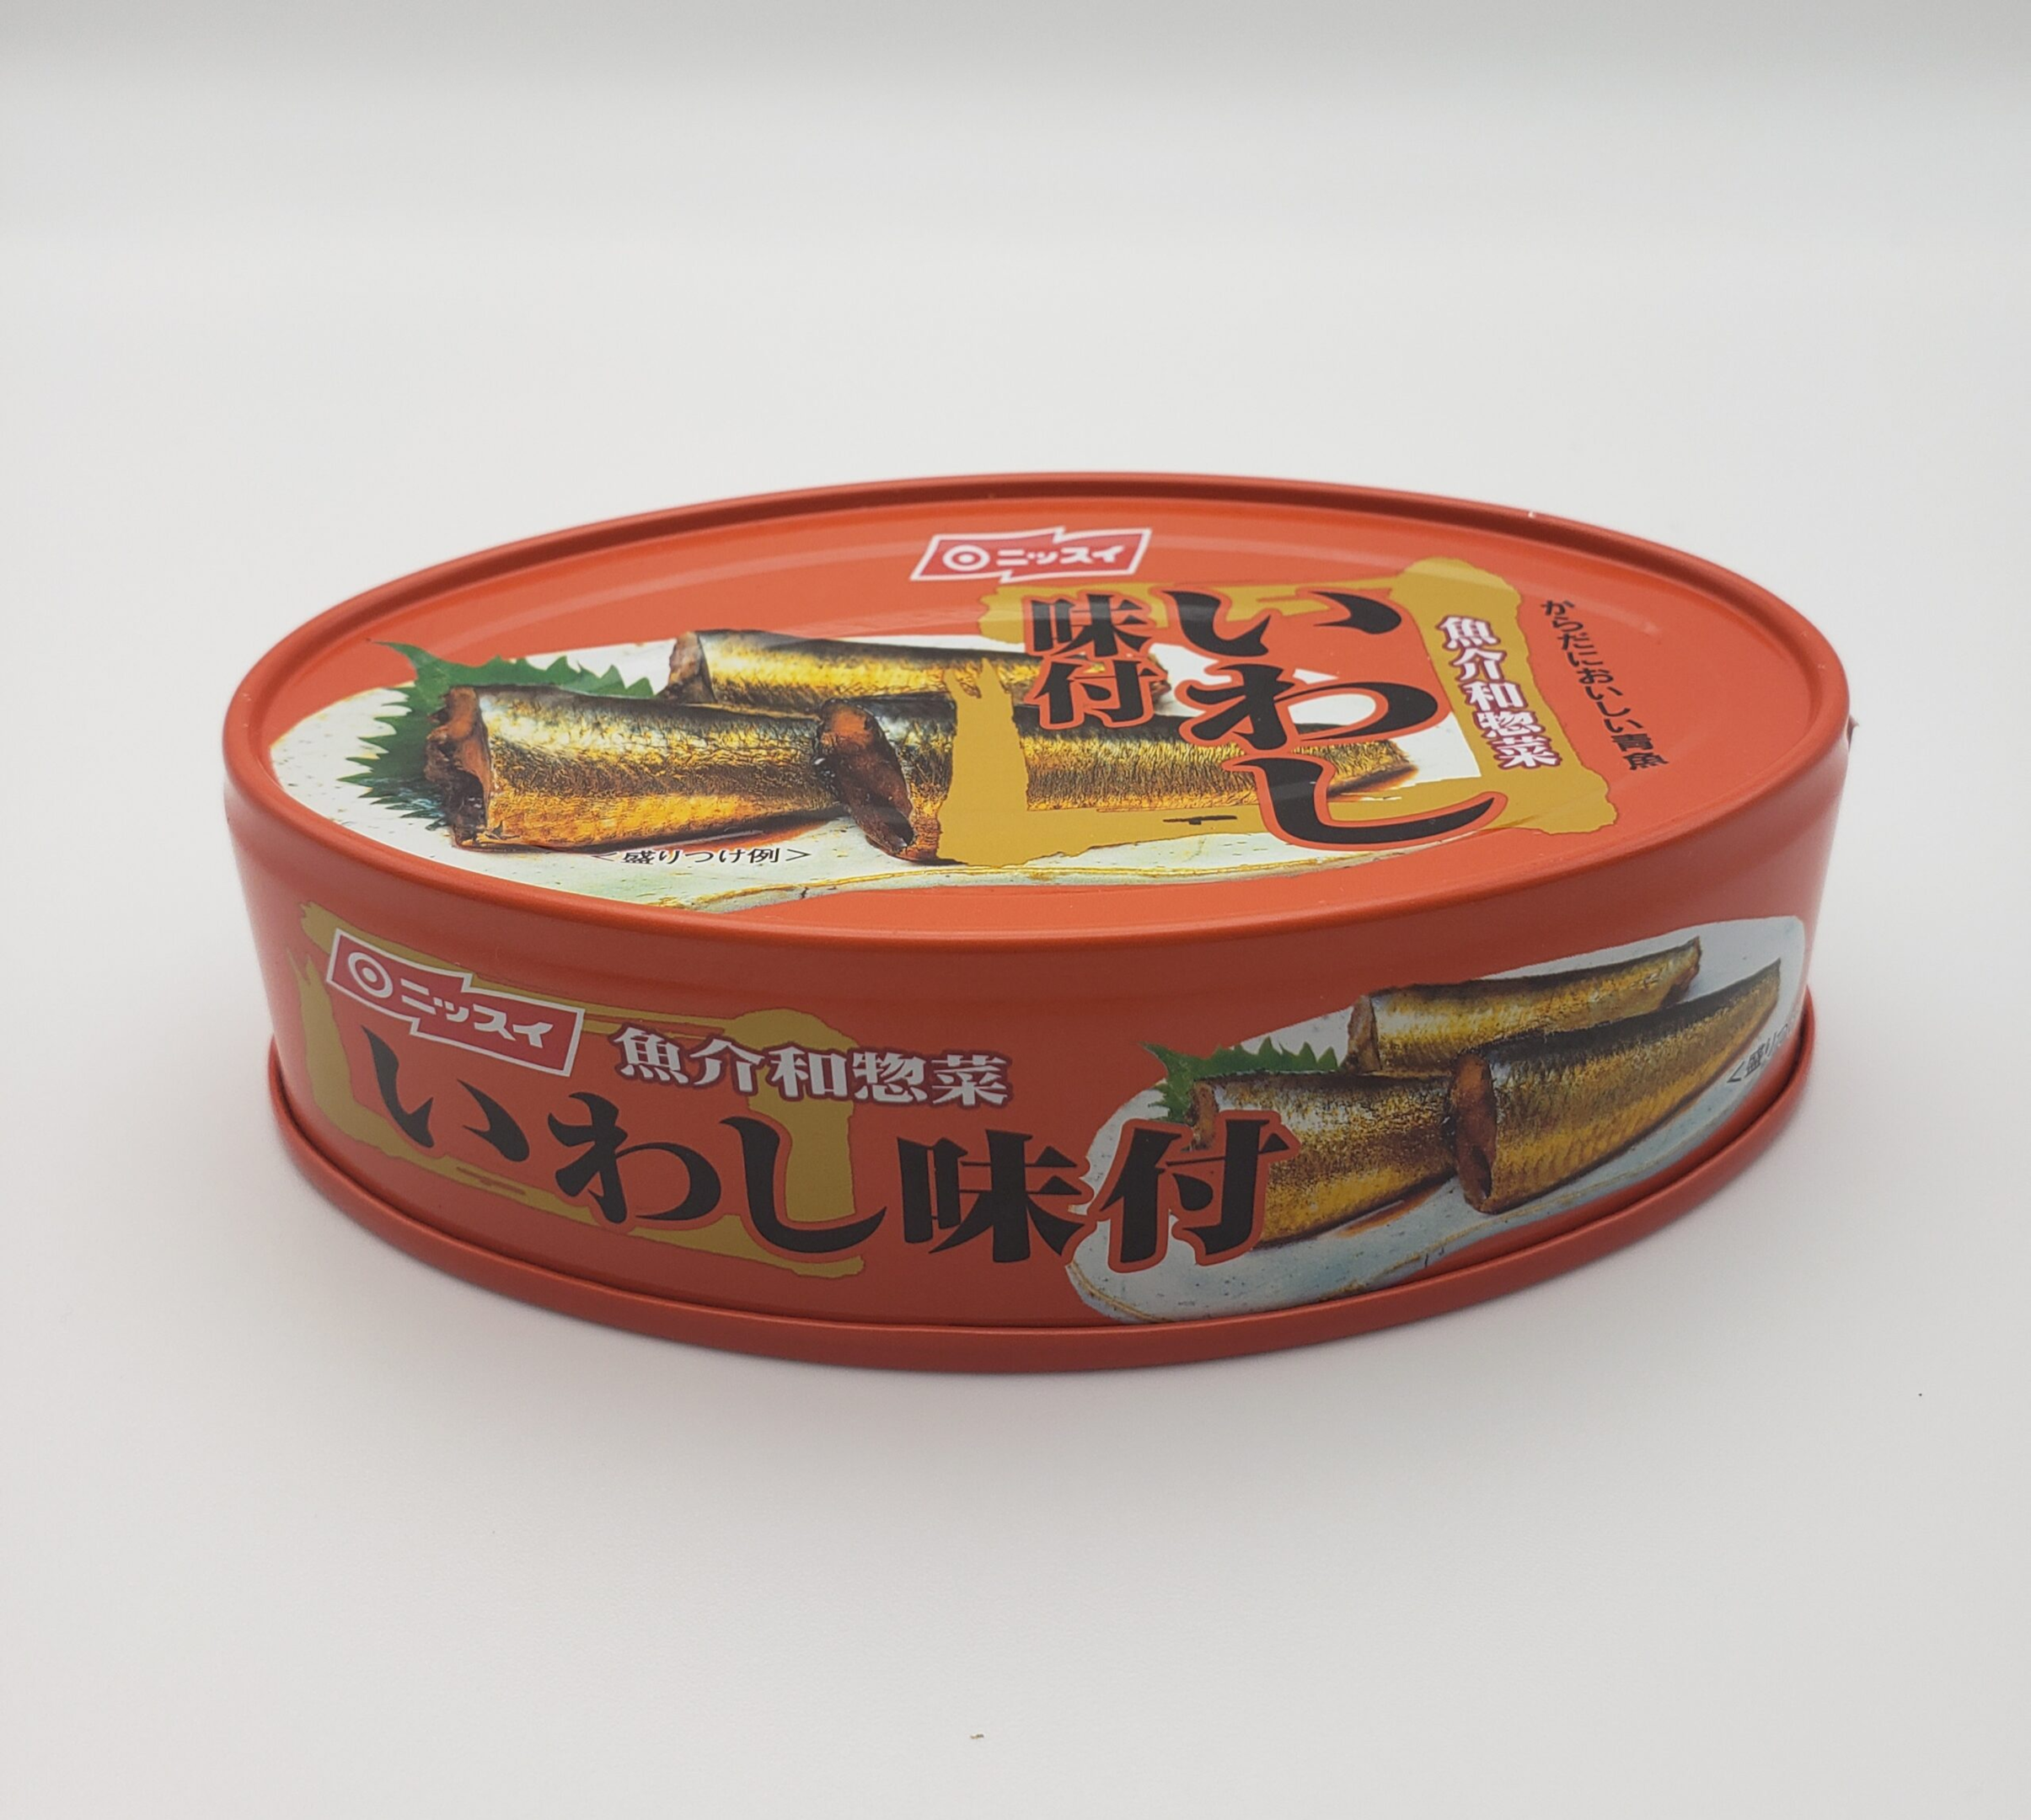  Canned Sardines in Soy Sauce (Nissui)